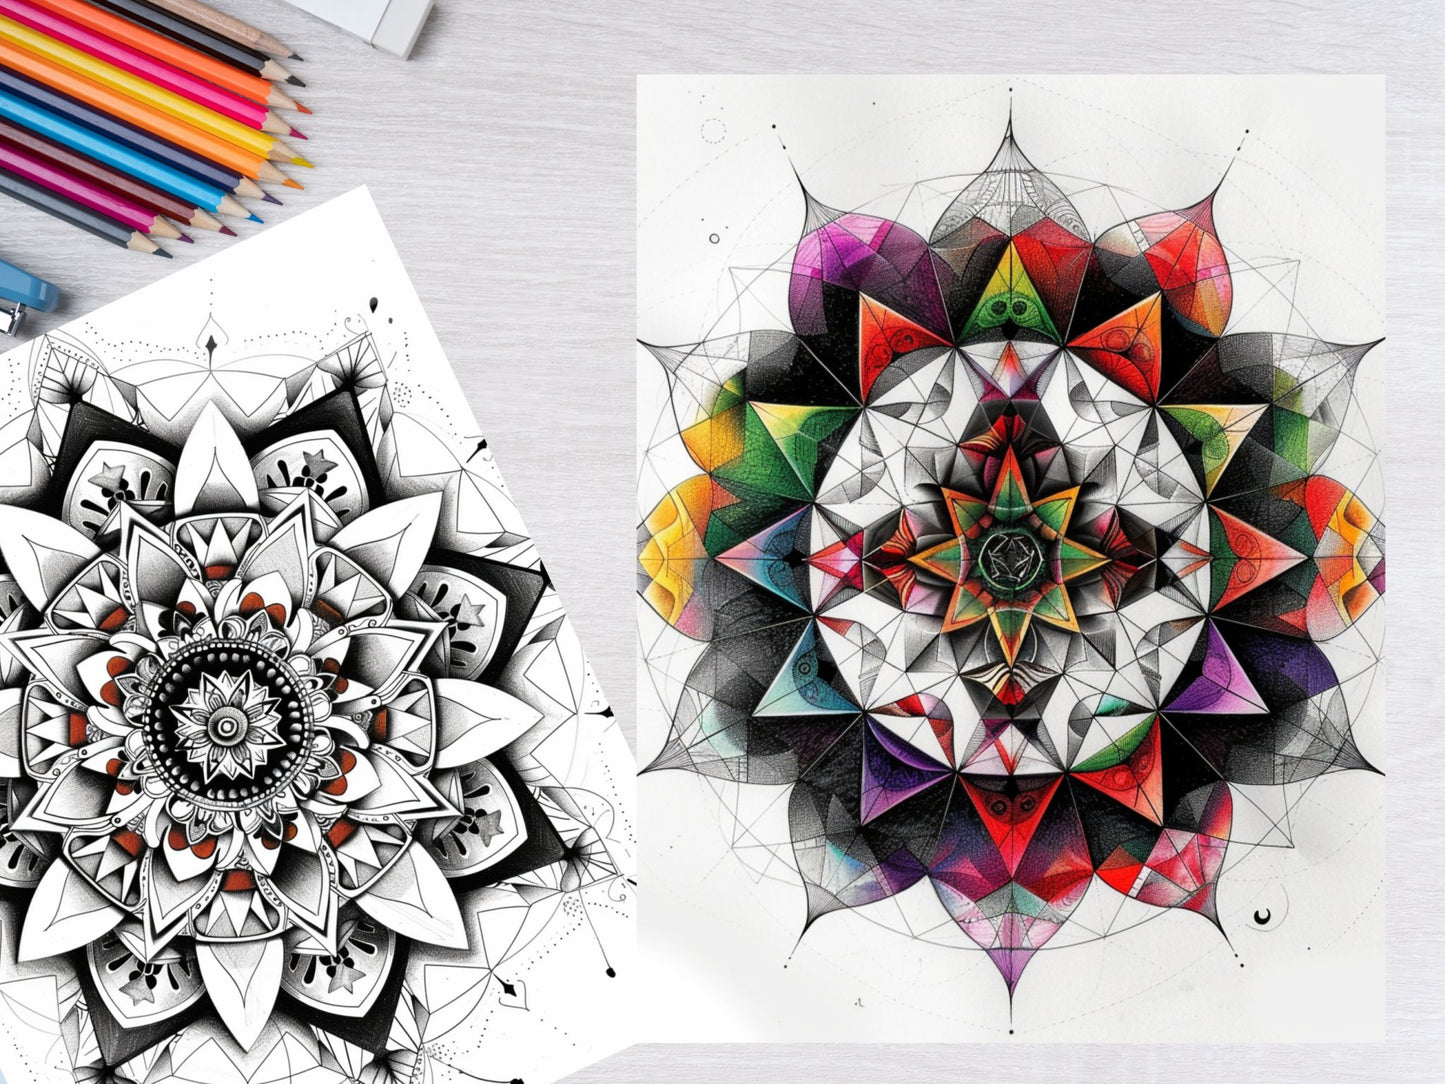 45 Geometric Mandala Coloring Pages - My Coloring Zone